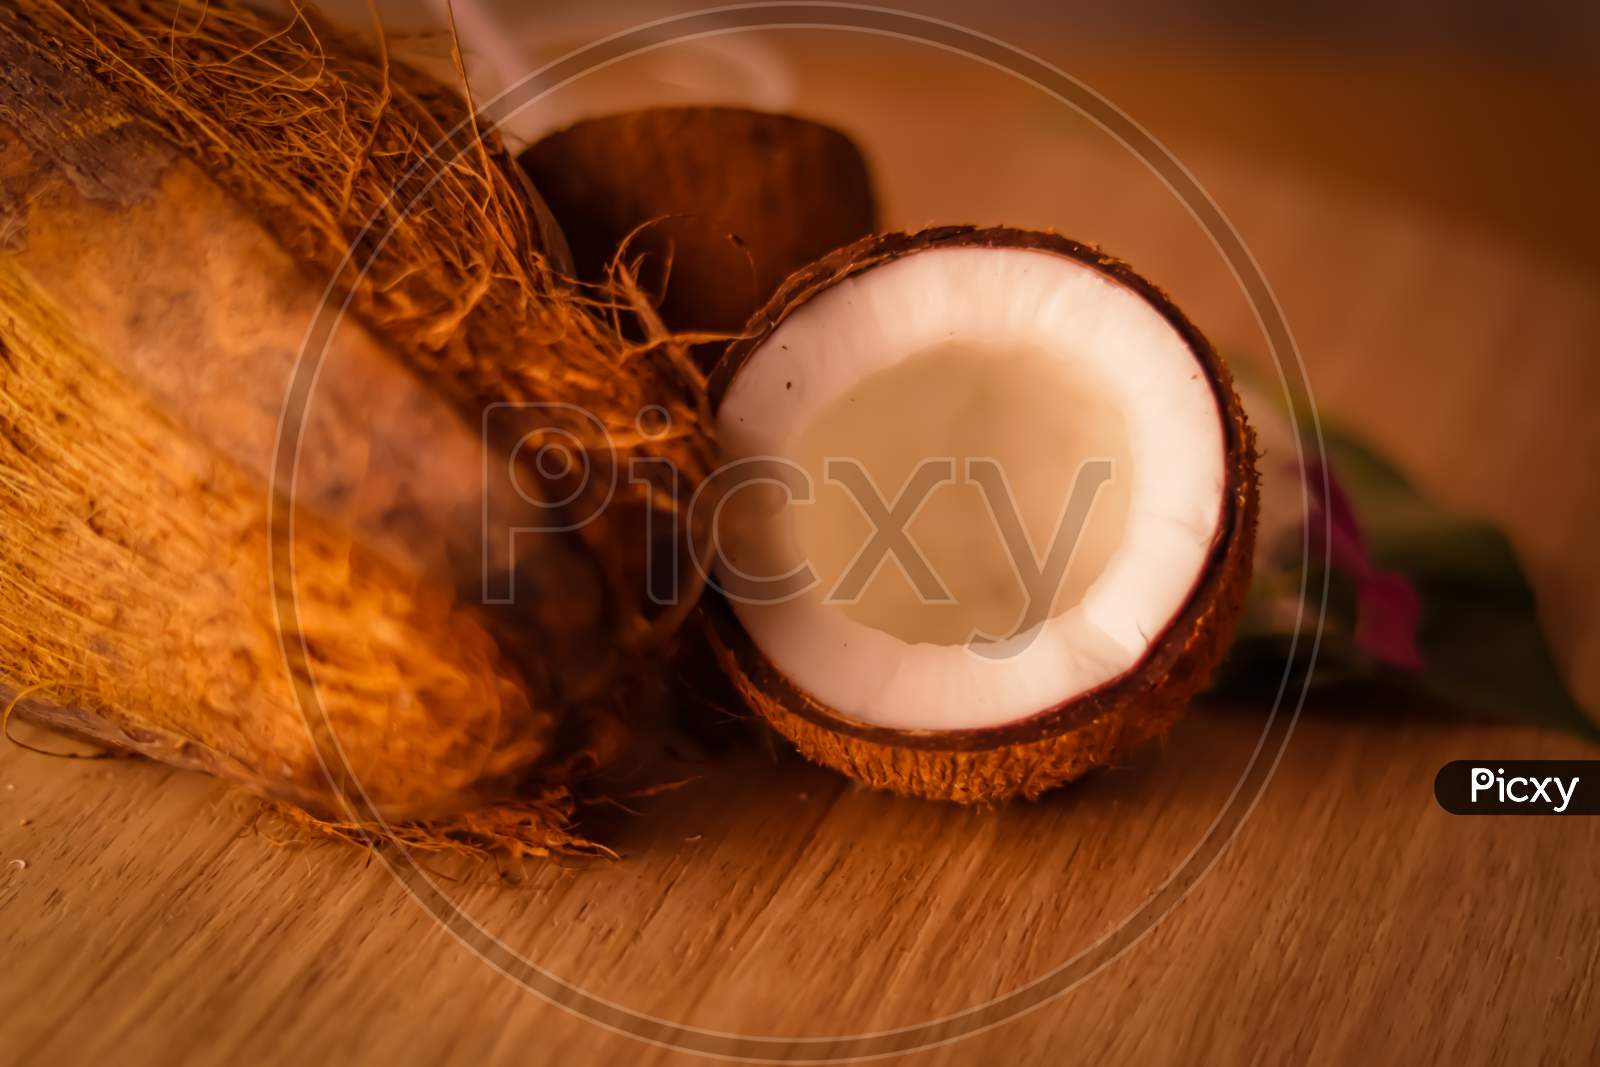 Coconut With Fresh Coco Milk And Powder On Wooden Table,Healthy Coconut Milk With Whole Nut,Coconut With Leaves And Flower,Cracked Coconut And Grated Coconut Flakes On Background.,Selective Focus On Subject,